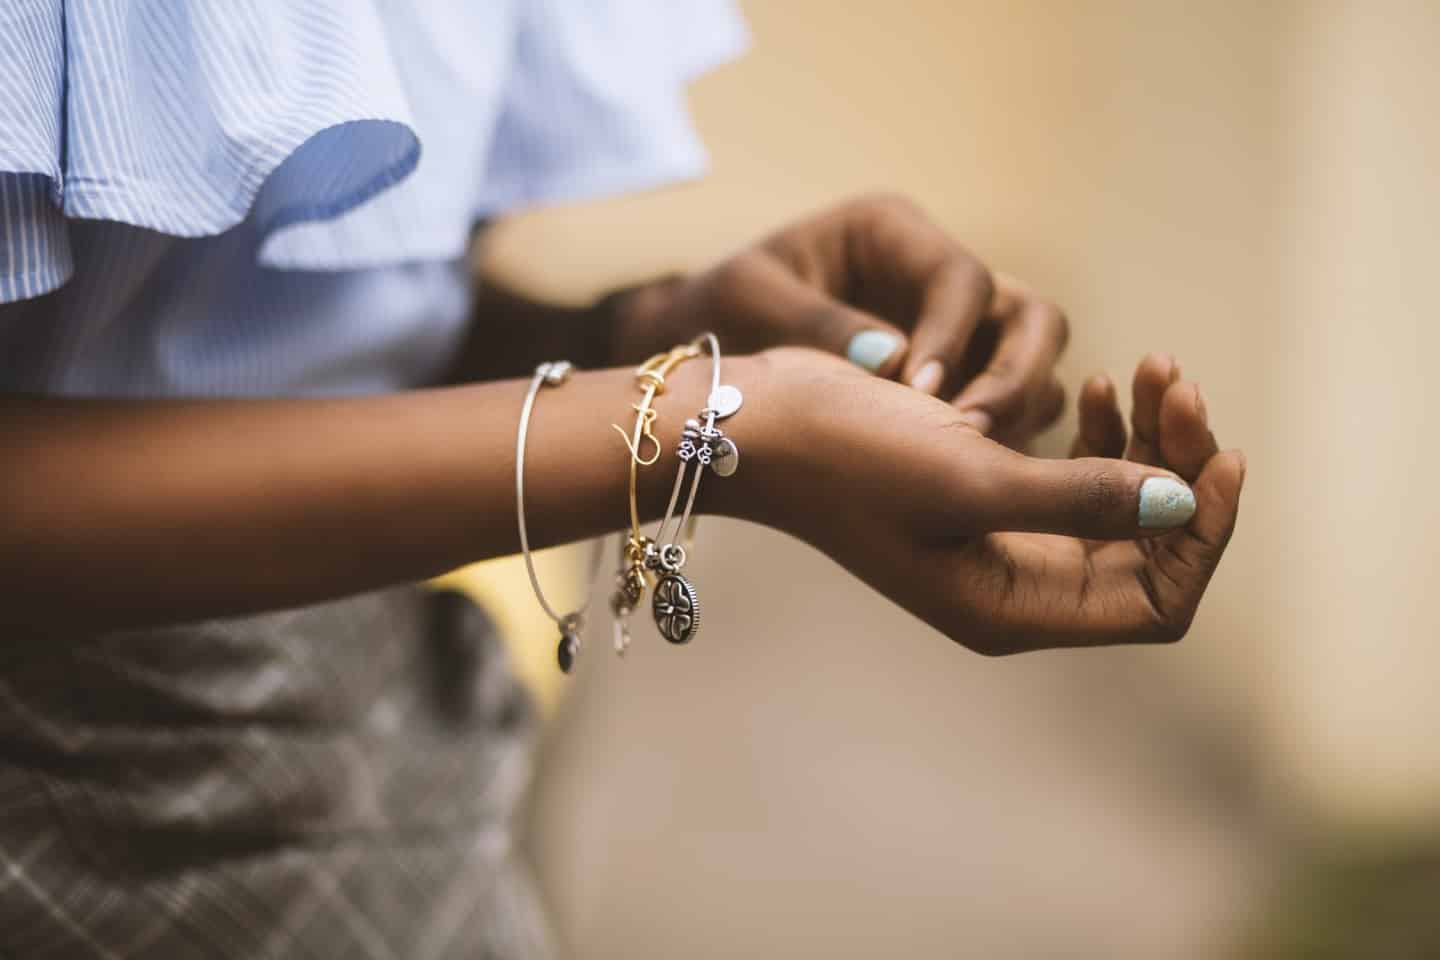 Shine Like A Tiffany Diamond: 6 Best Practices for Jewelry Brands